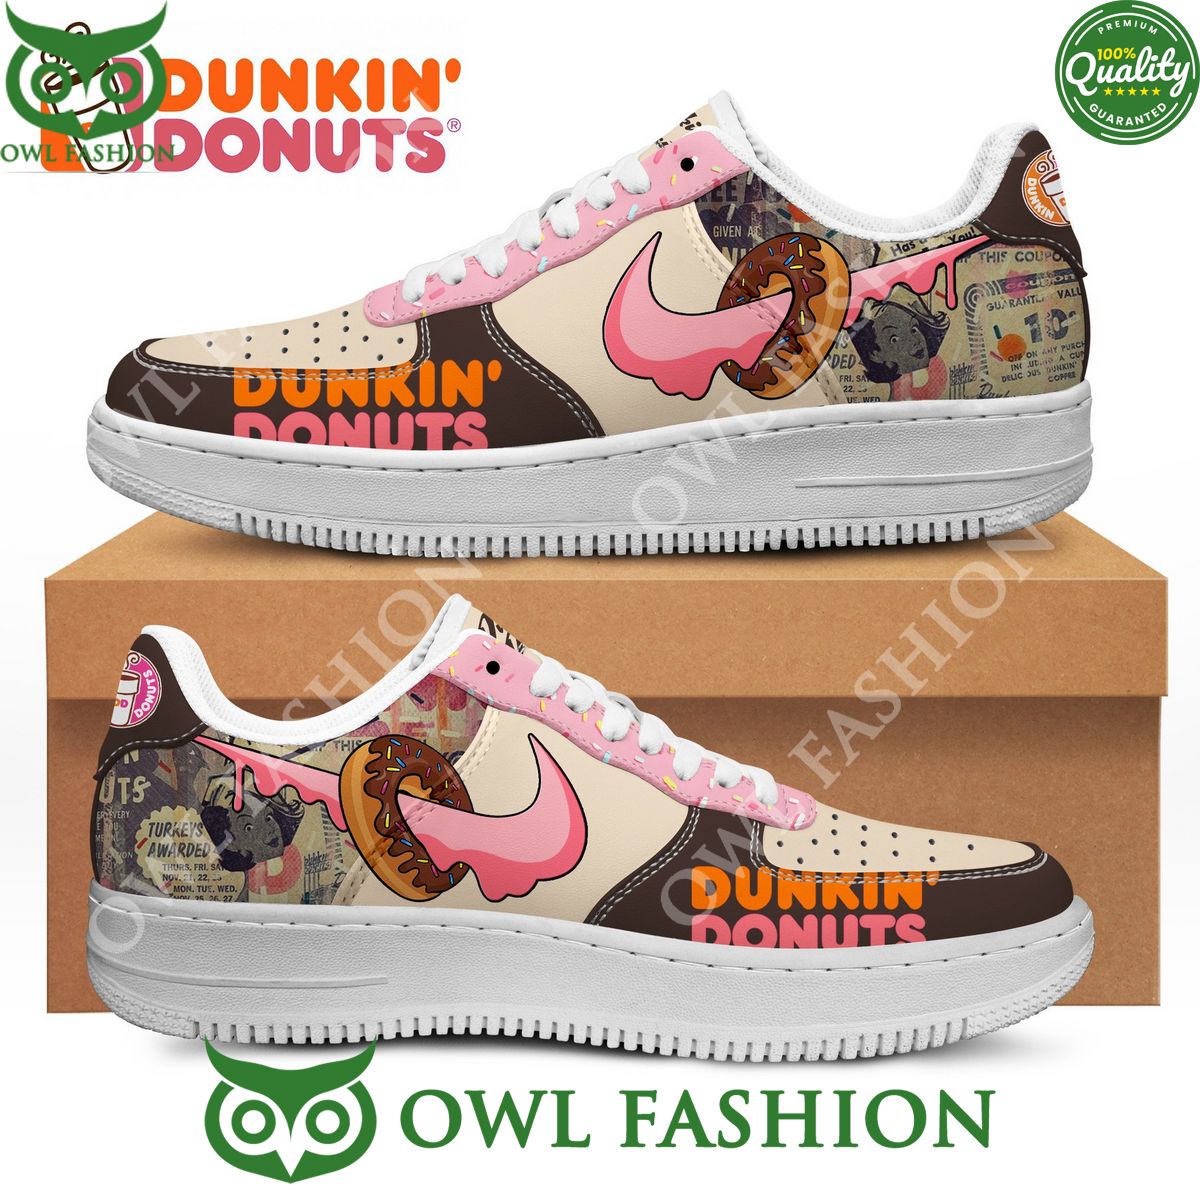 Dunkin Donuts American multinational coffee and doughnut company Air Force shoes